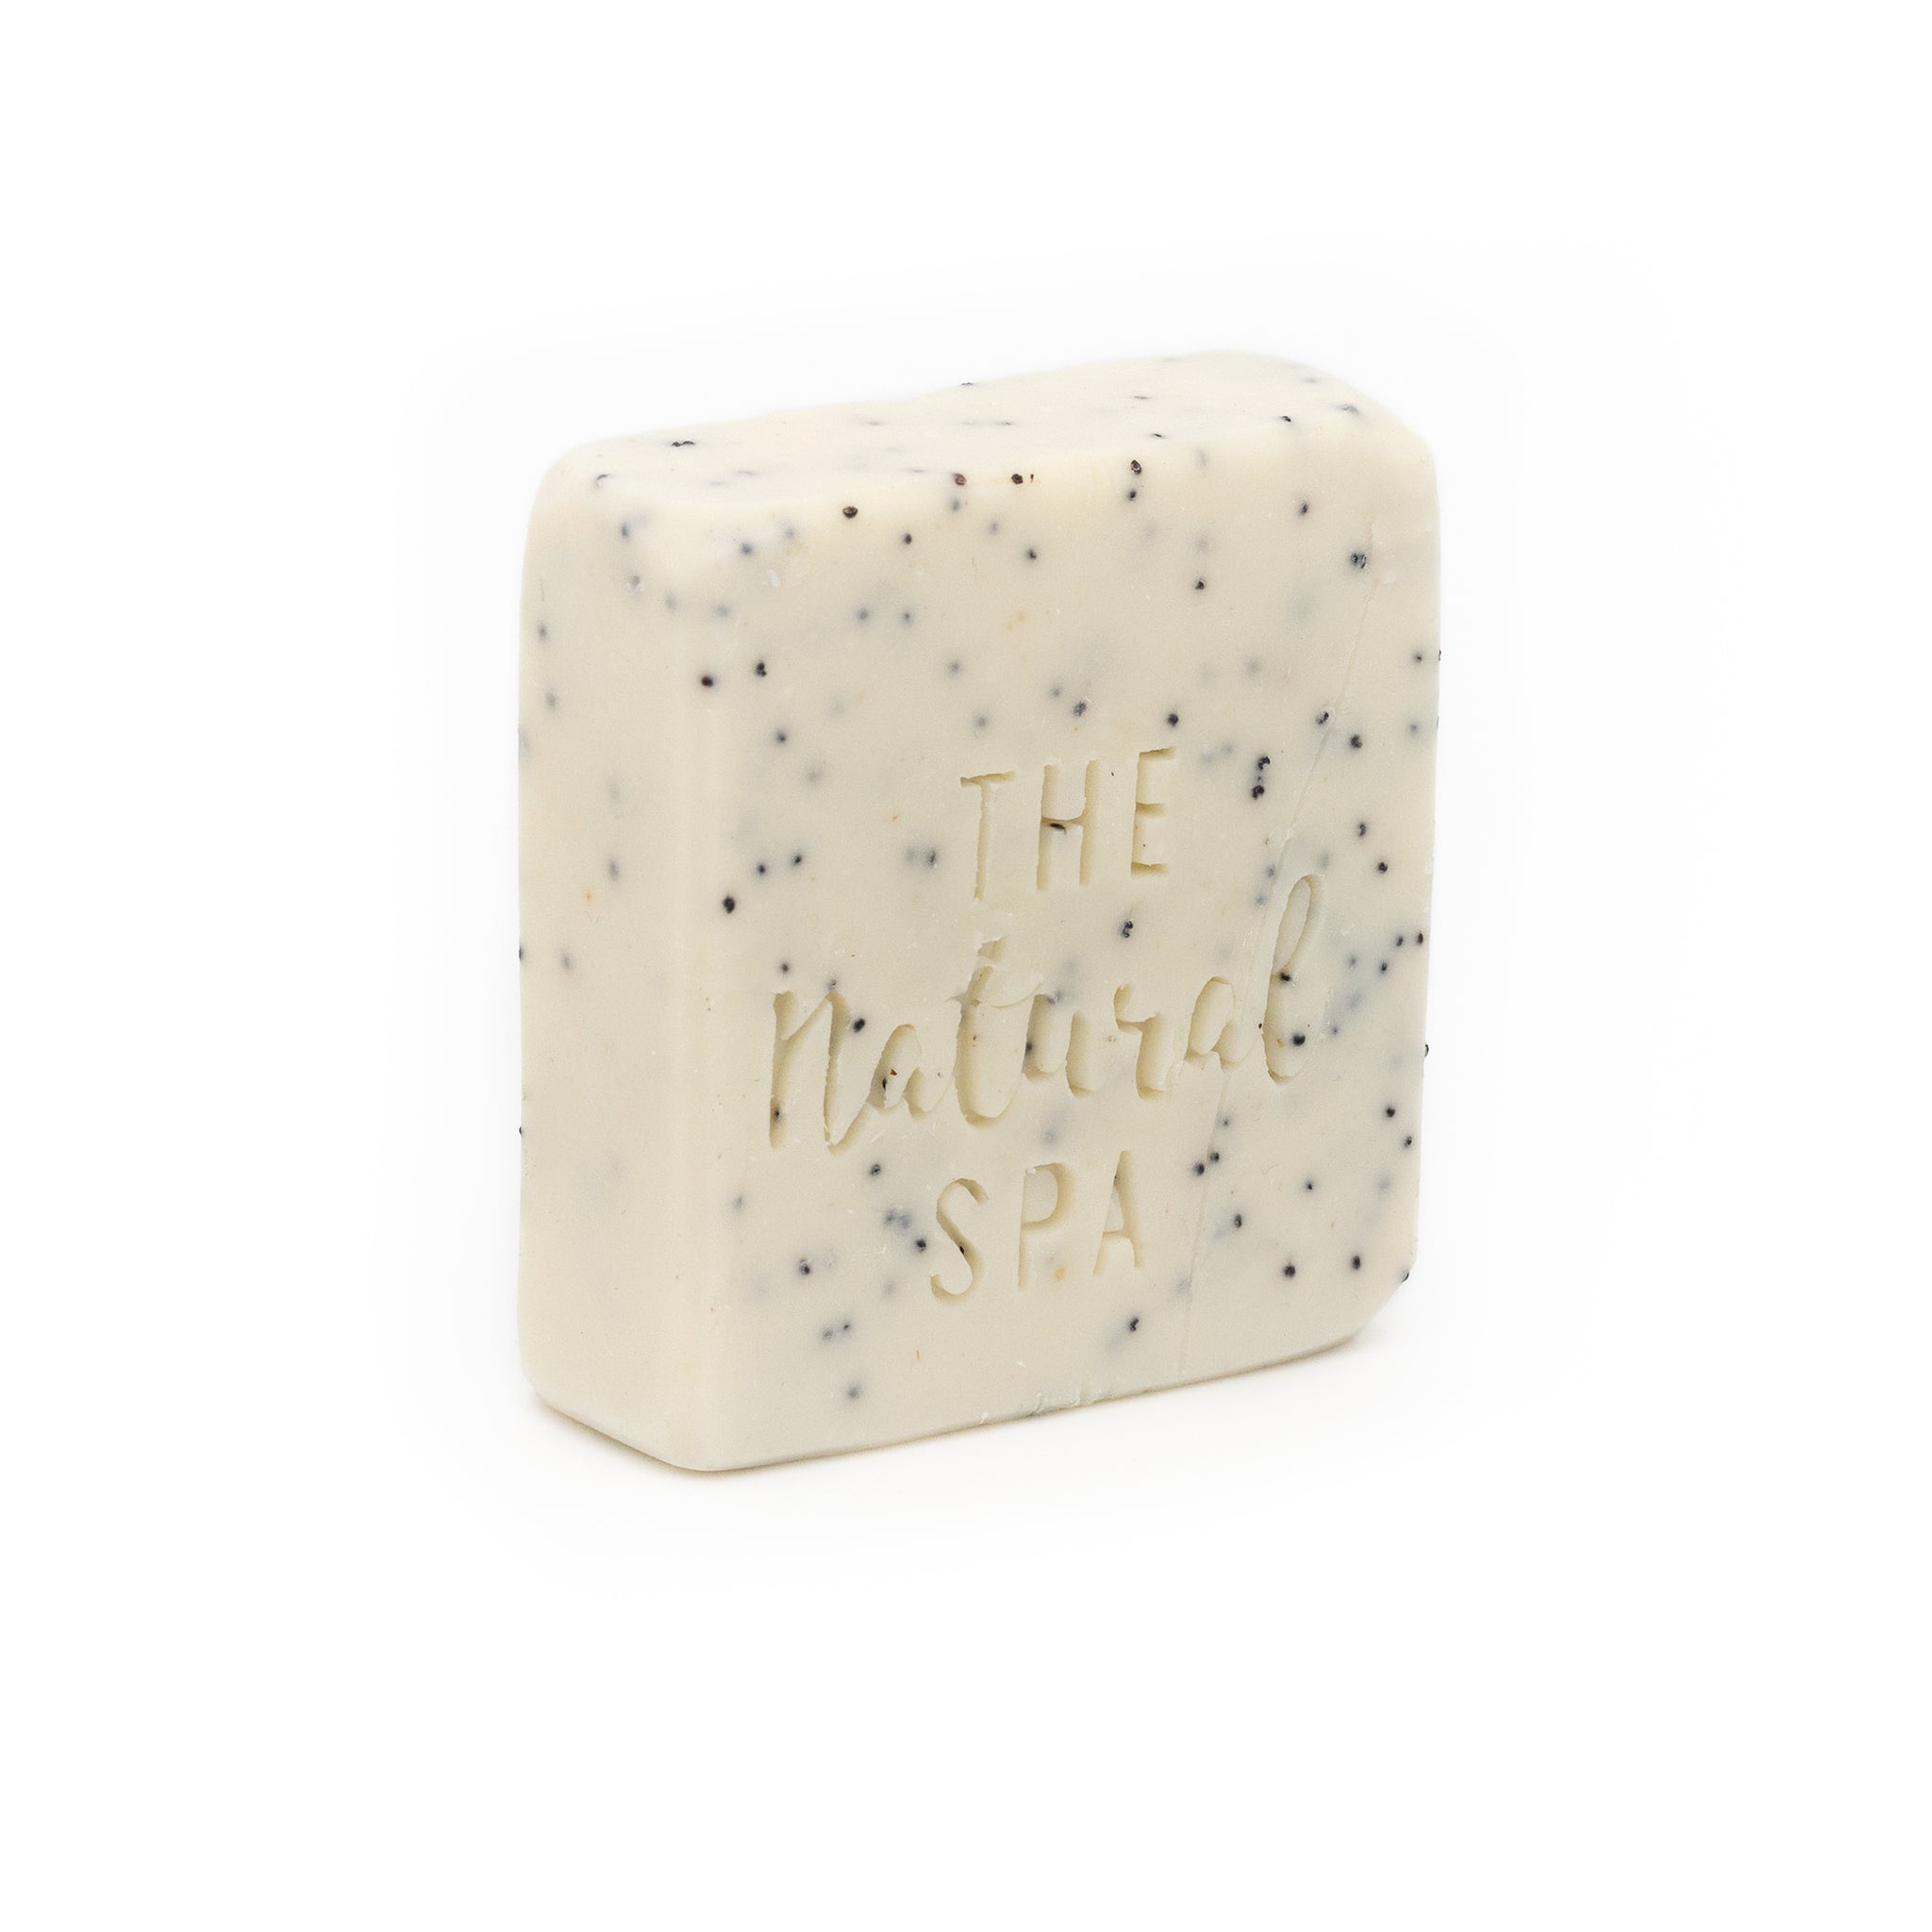 Frost 100g - Cold Process Soap Bar - Clearstone